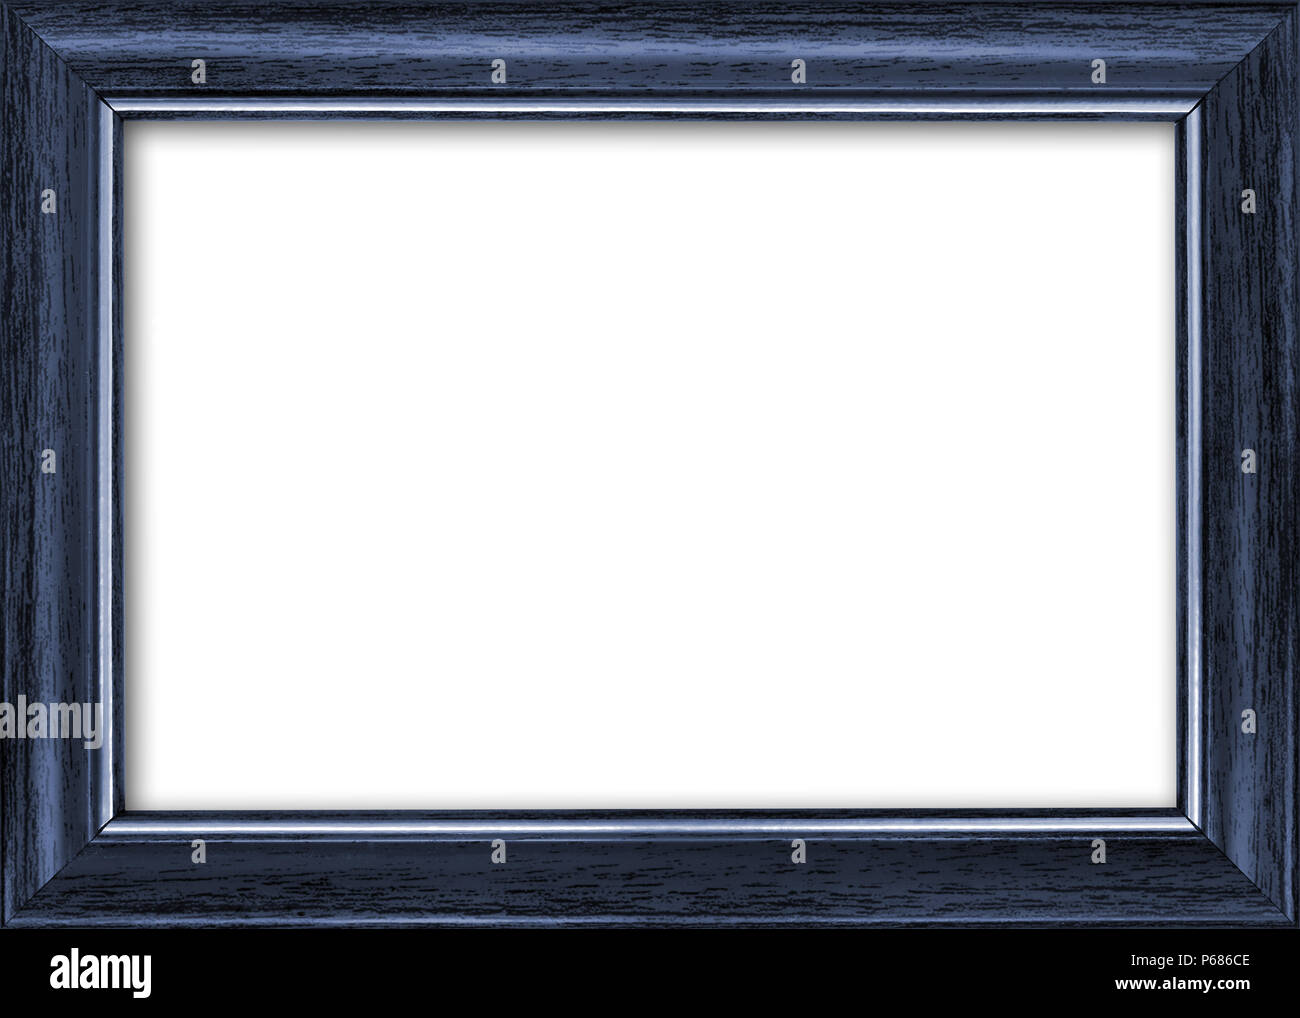 https://c8.alamy.com/comp/P686CE/empty-picture-frame-with-a-free-place-inside-isolated-on-white-P686CE.jpg